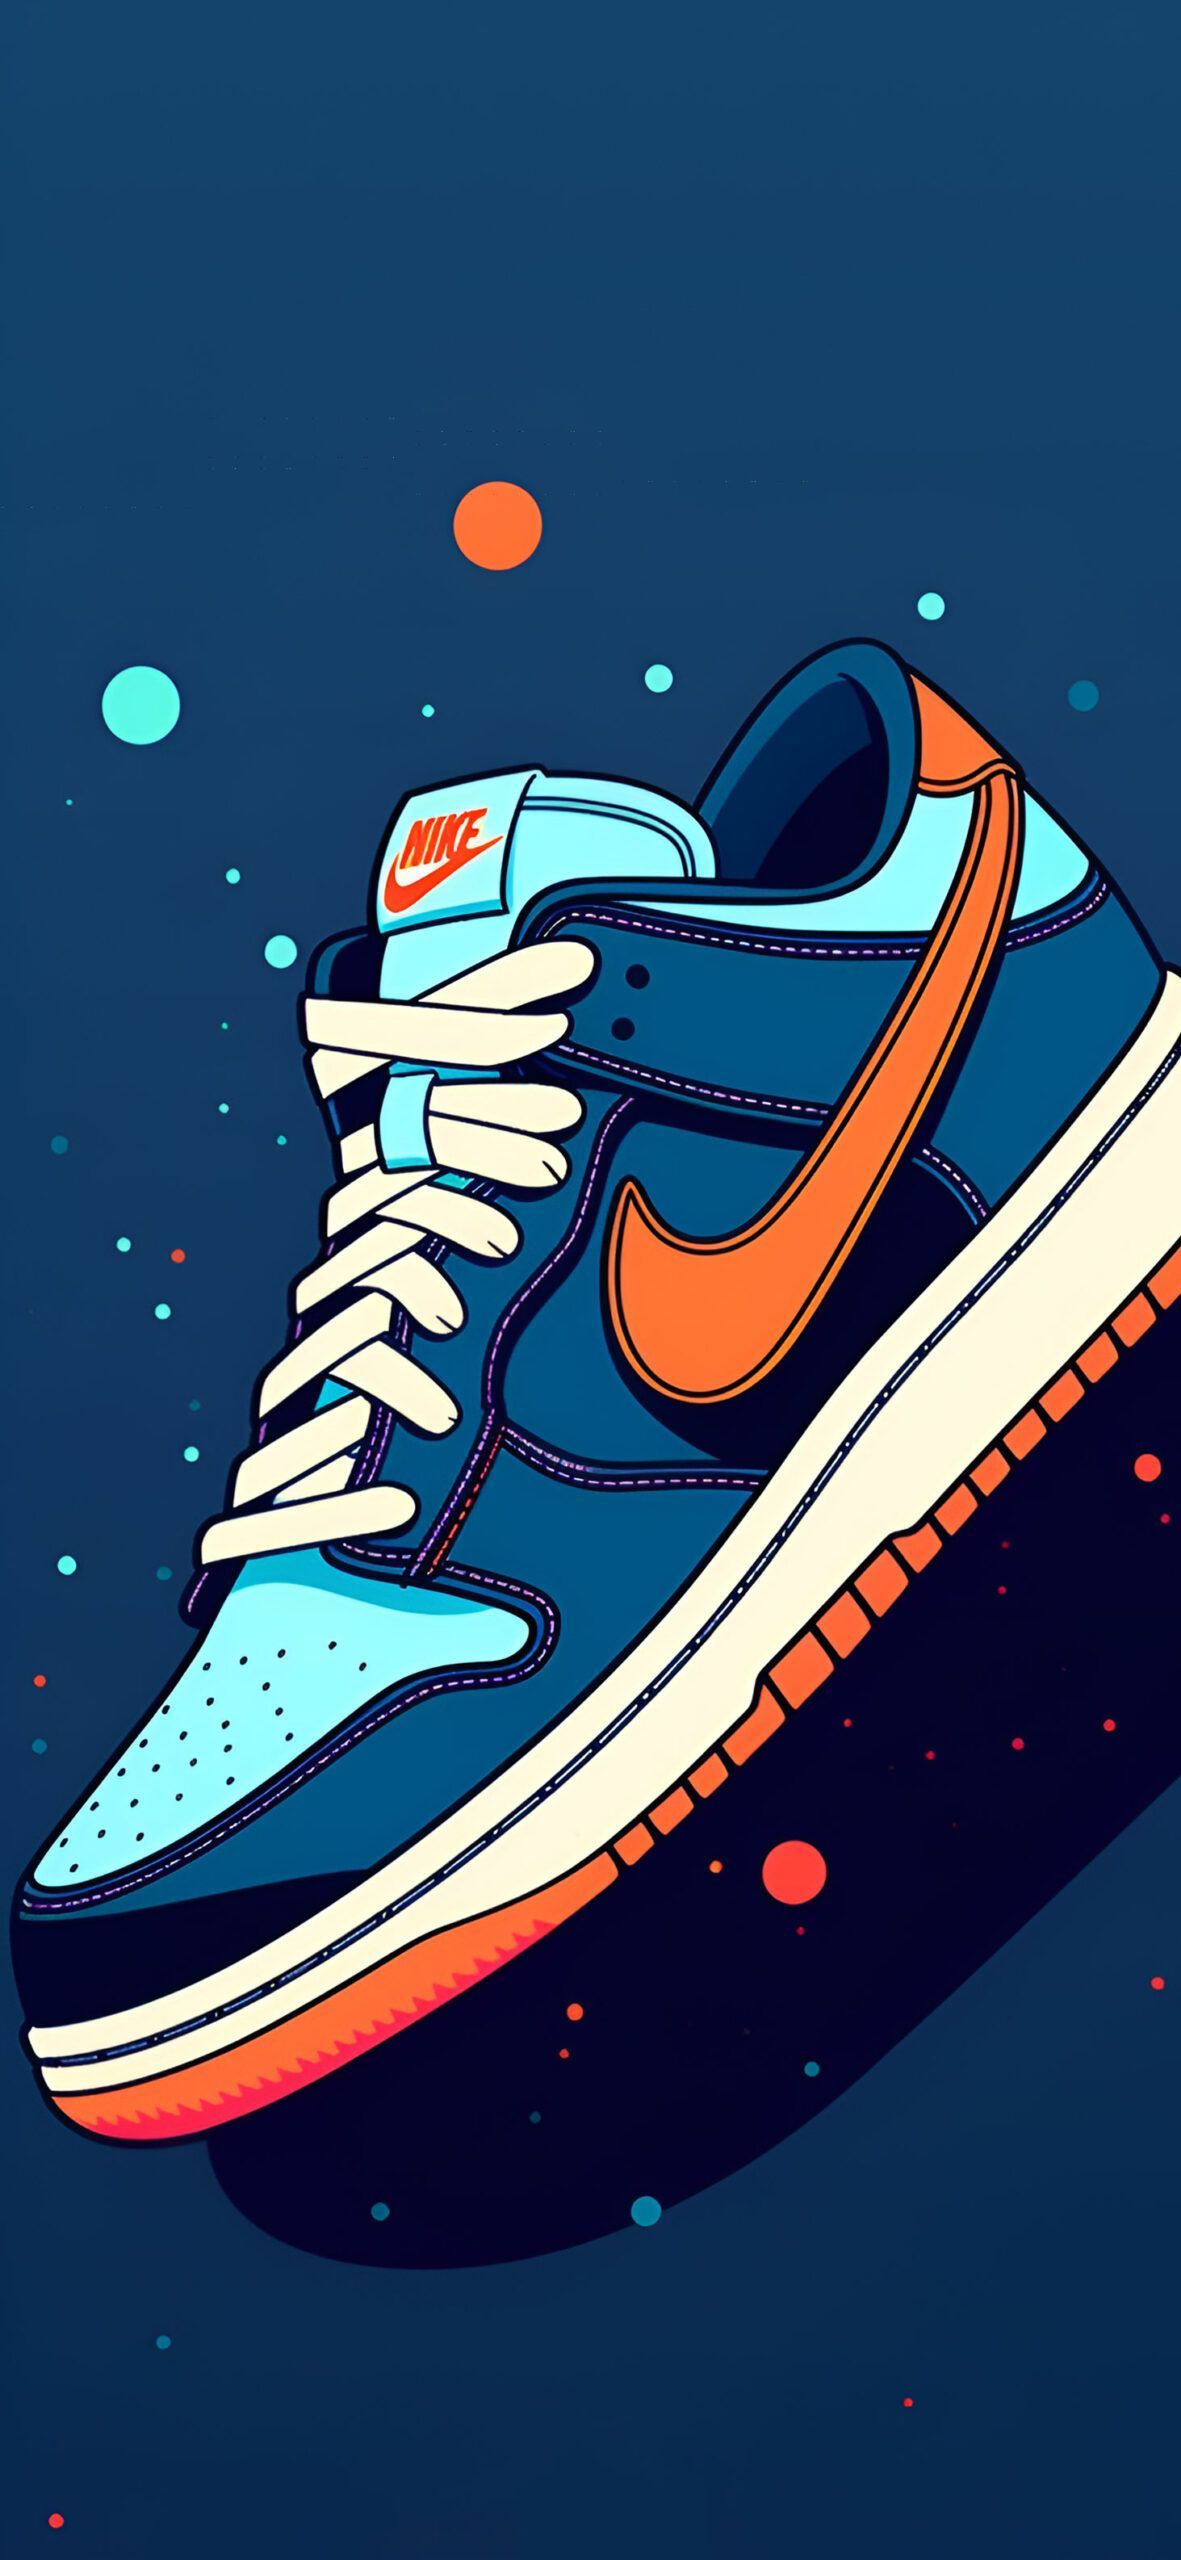 Nike wallpaper for iPhone. Nike, Air Jordan, and all other brands are copyrights of their respective owners - Nike, Air Jordan